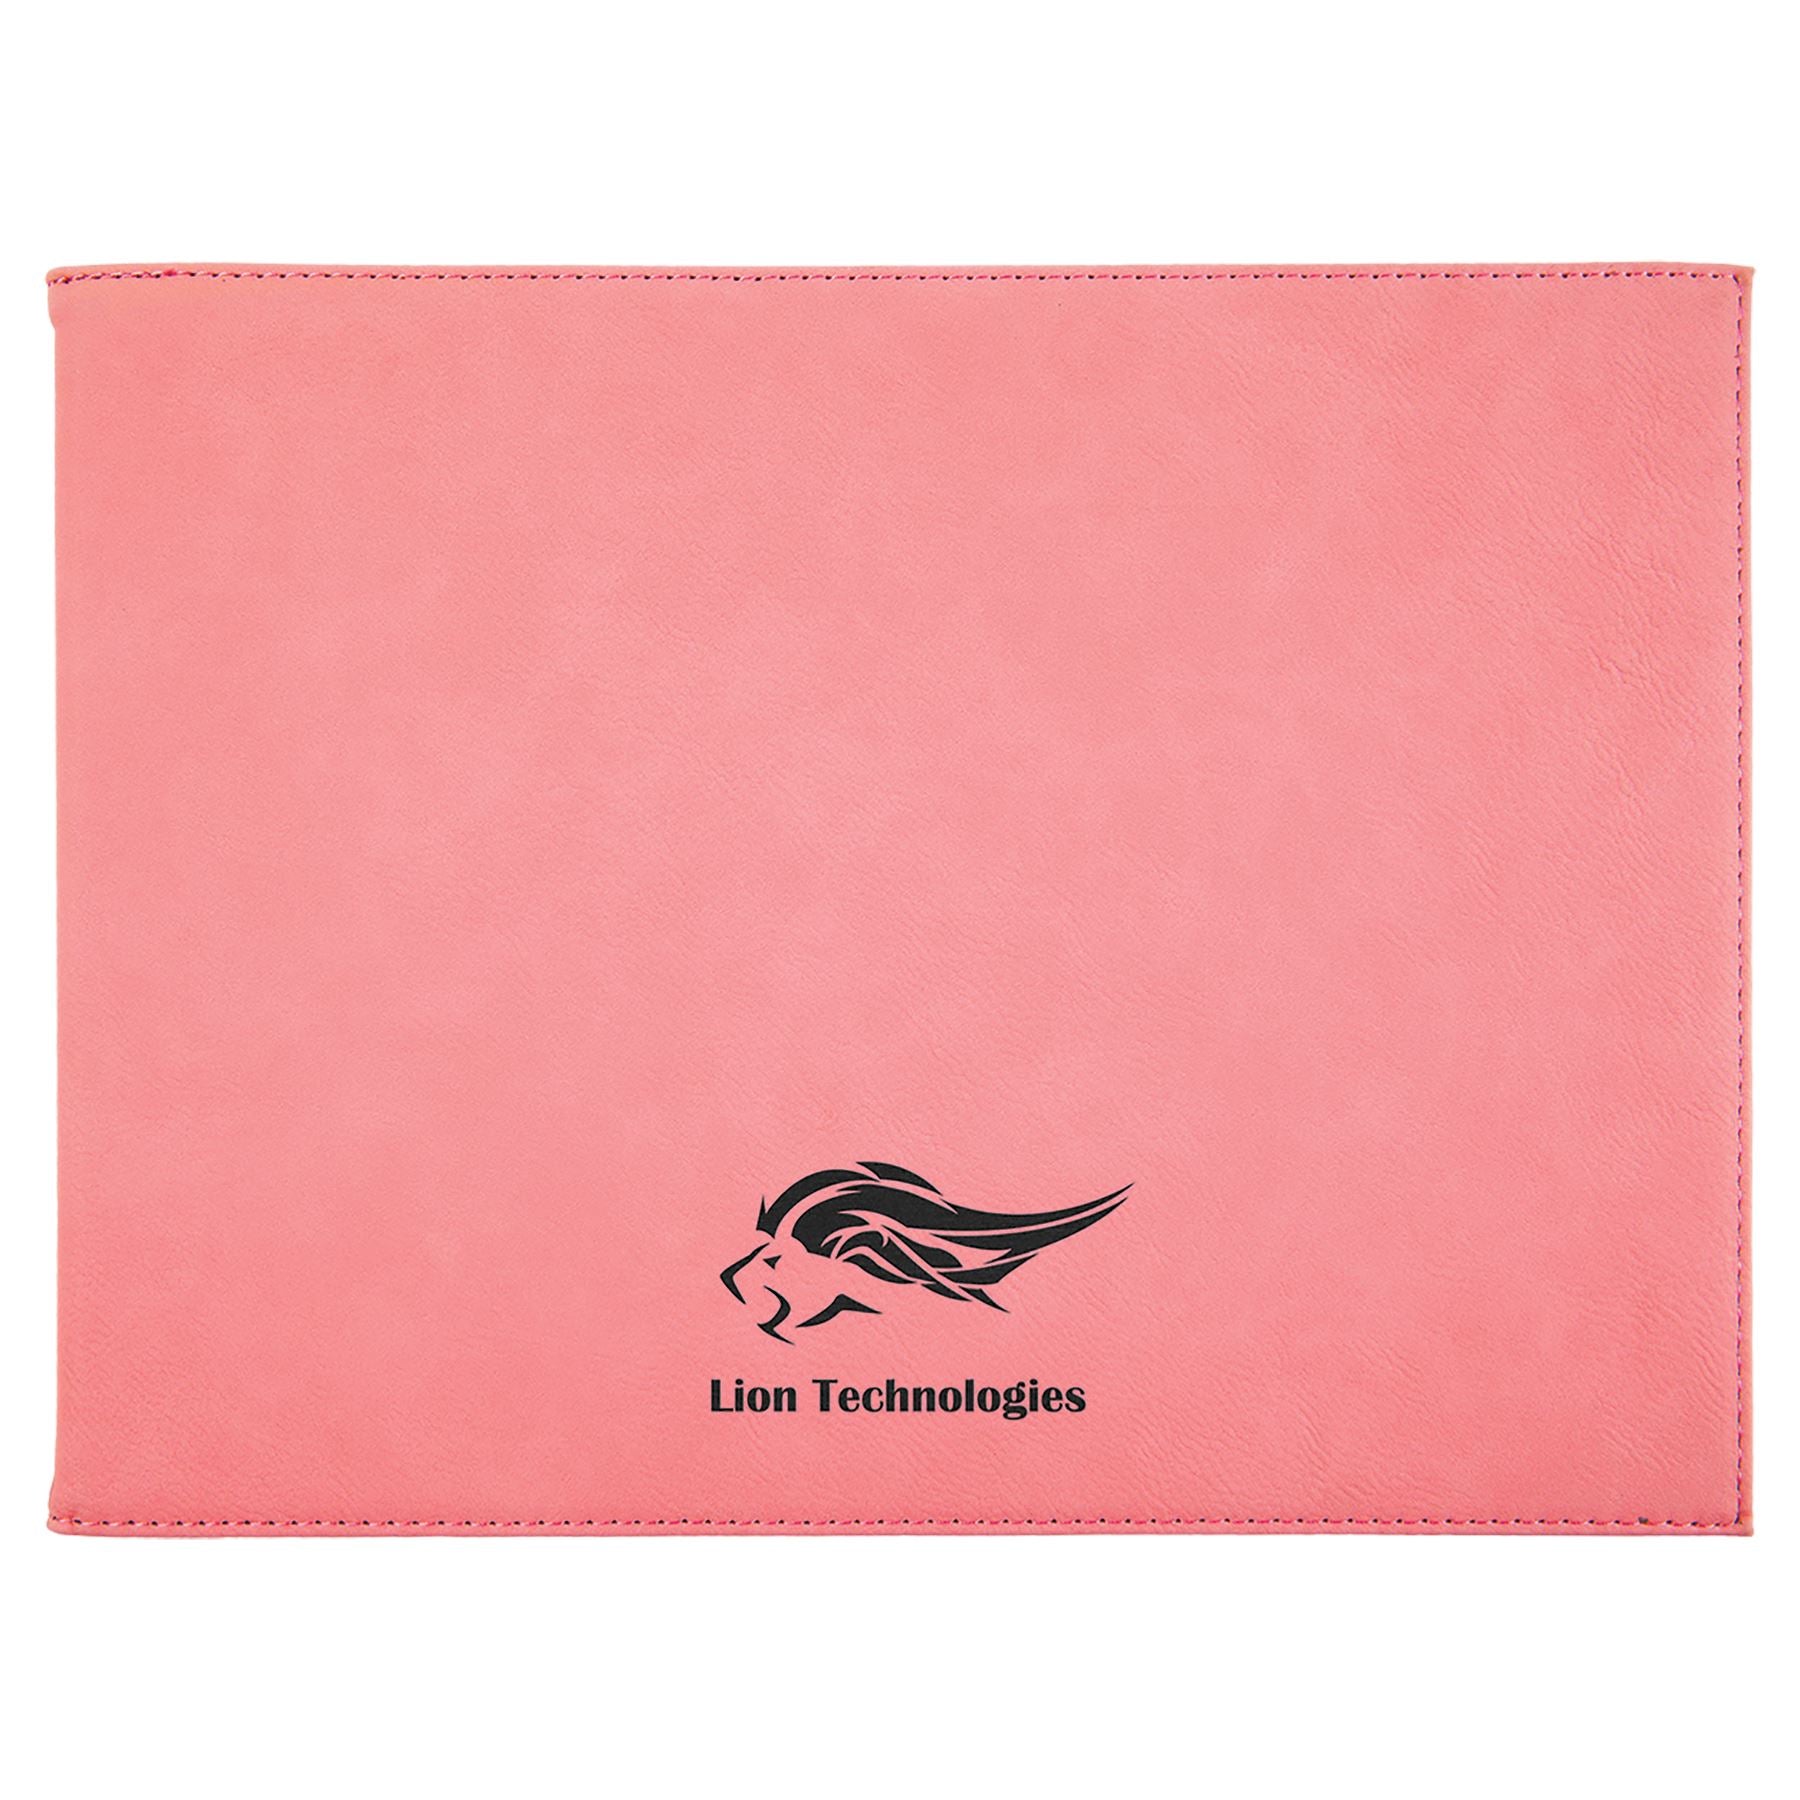 Certificate/Diploma Holder 9" x 12" (Holds 8 1/2" x 11" Document), Laserable Leatherette Certificate Holder Craftworks NW Pink/Black 